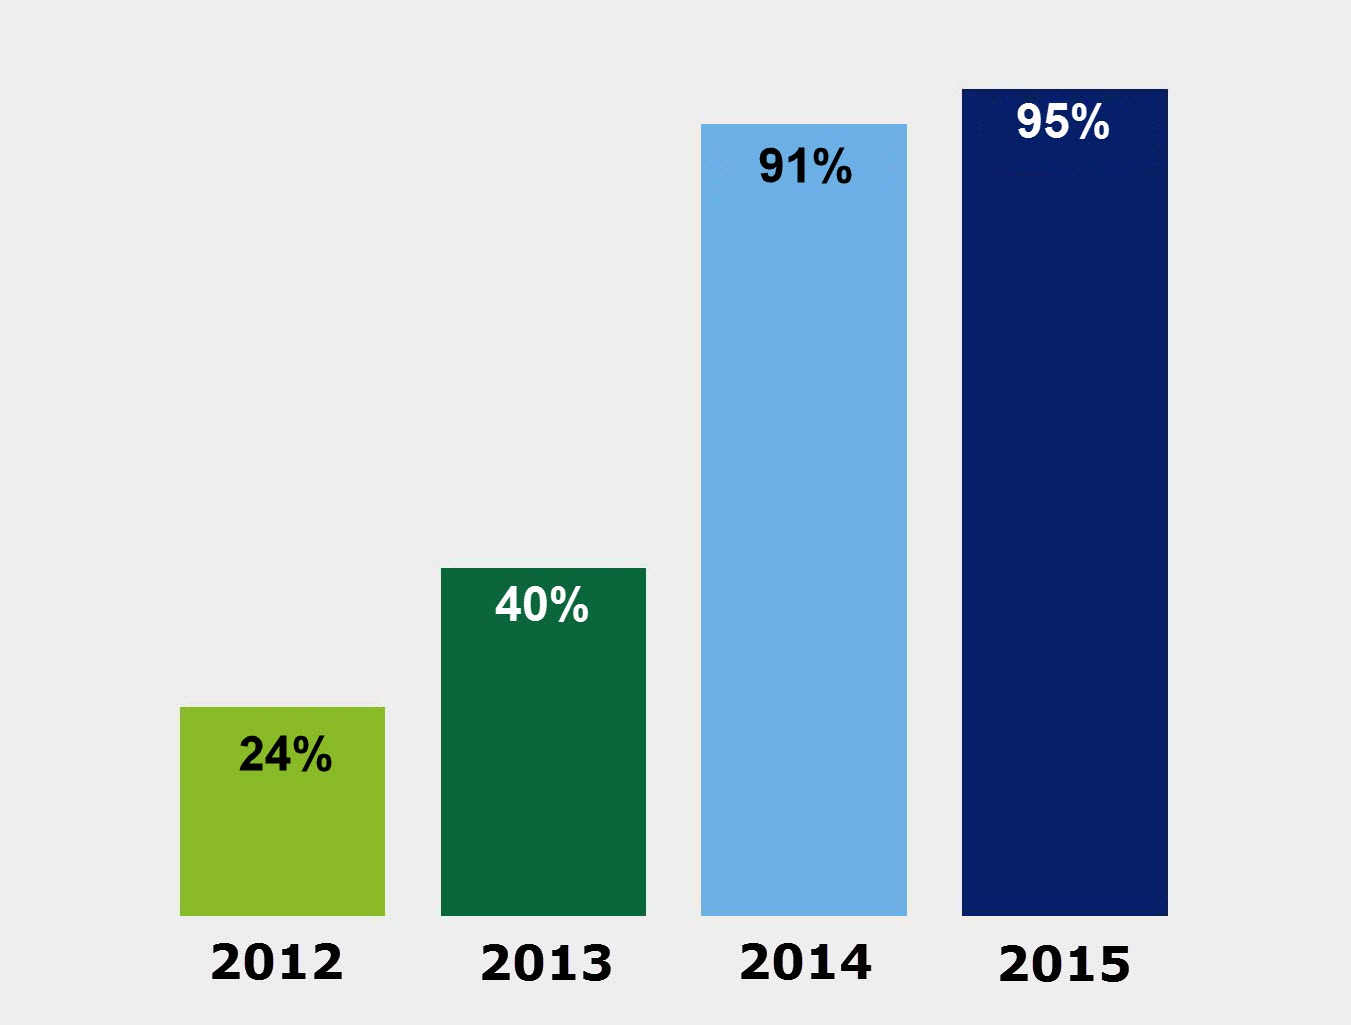 A chart of eHealth patient access in year 2012 to 2015.